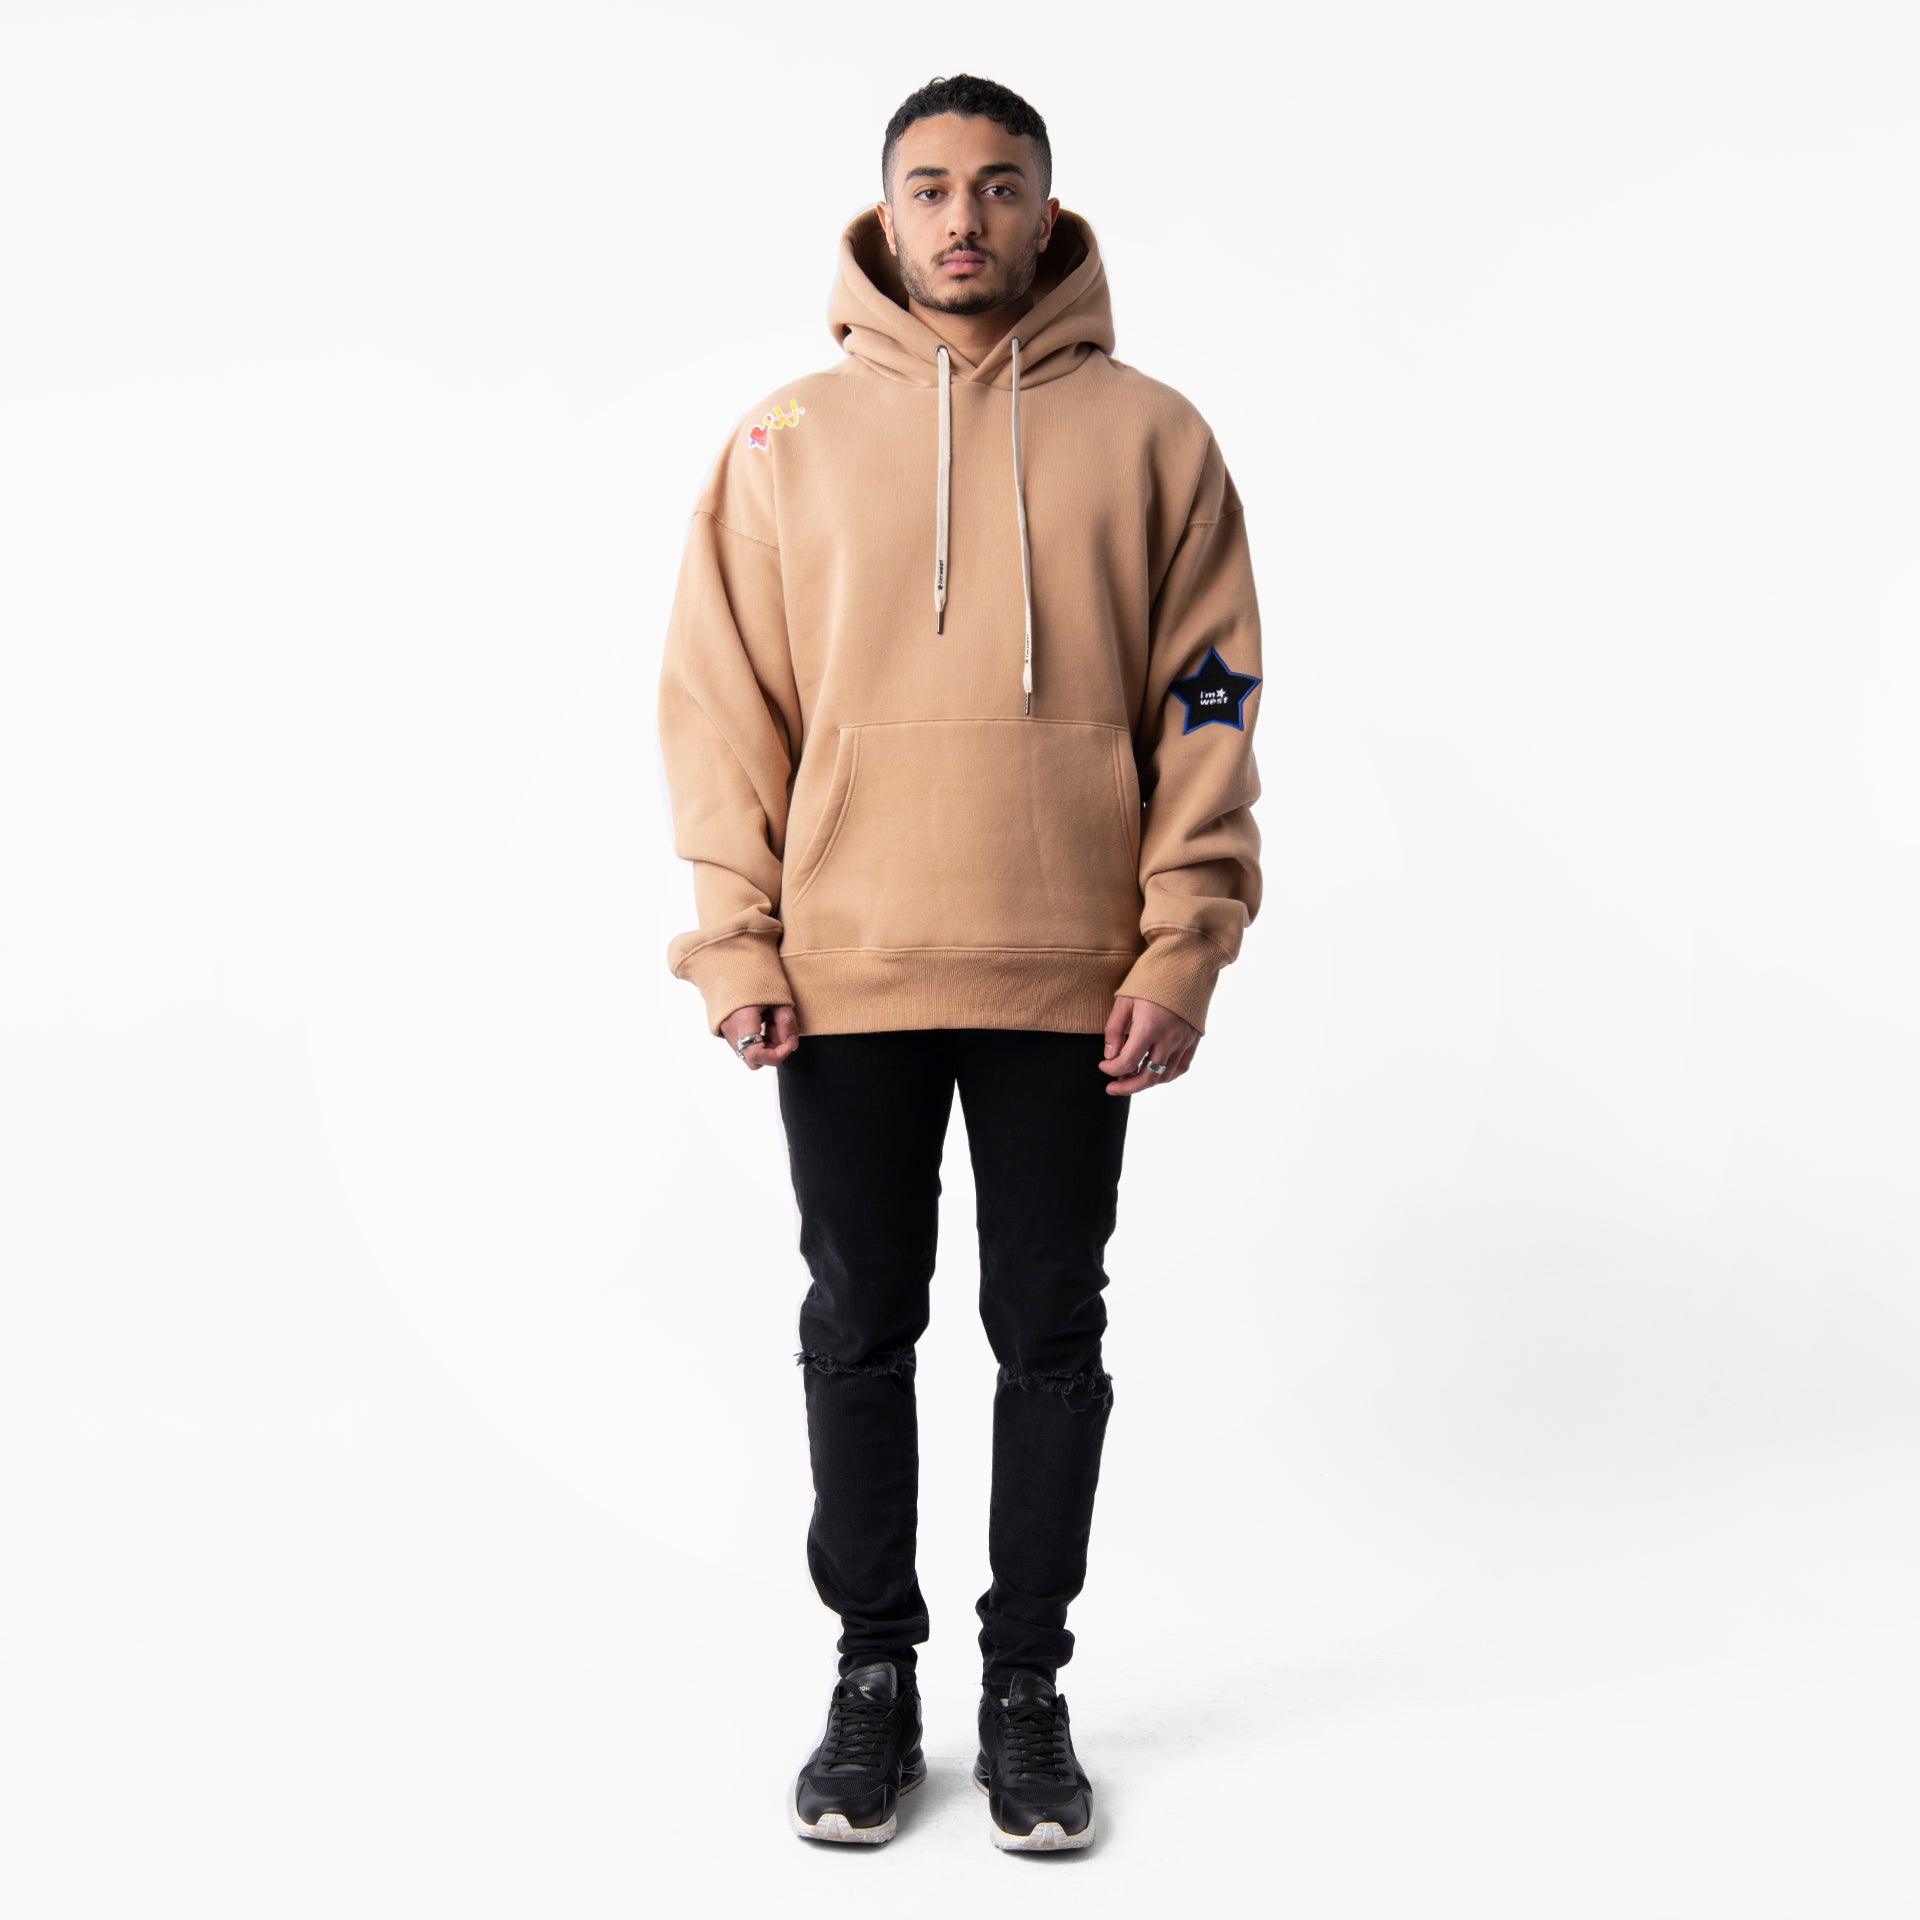 Beige Classic Hoodie From I'm West - WECRE8